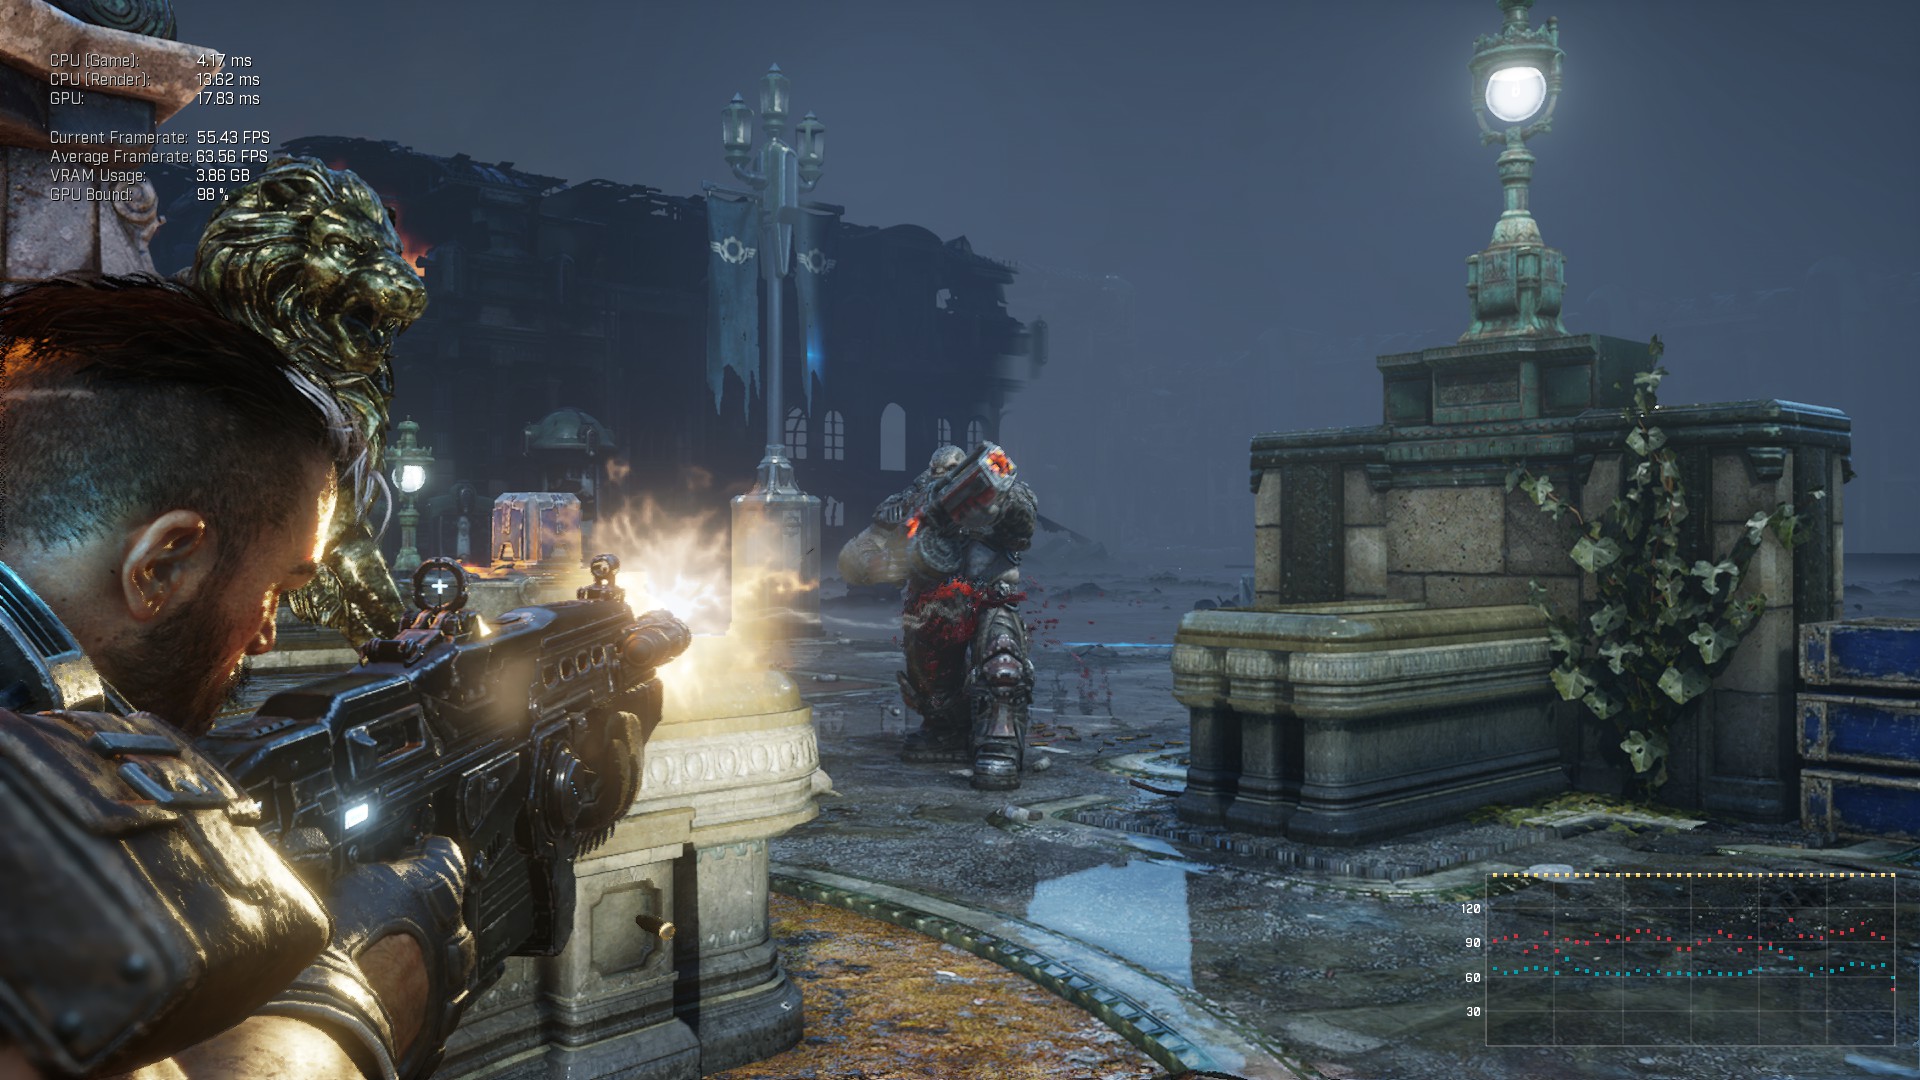 Gears Of War 4 PC Will Have Better Graphical Control on PC